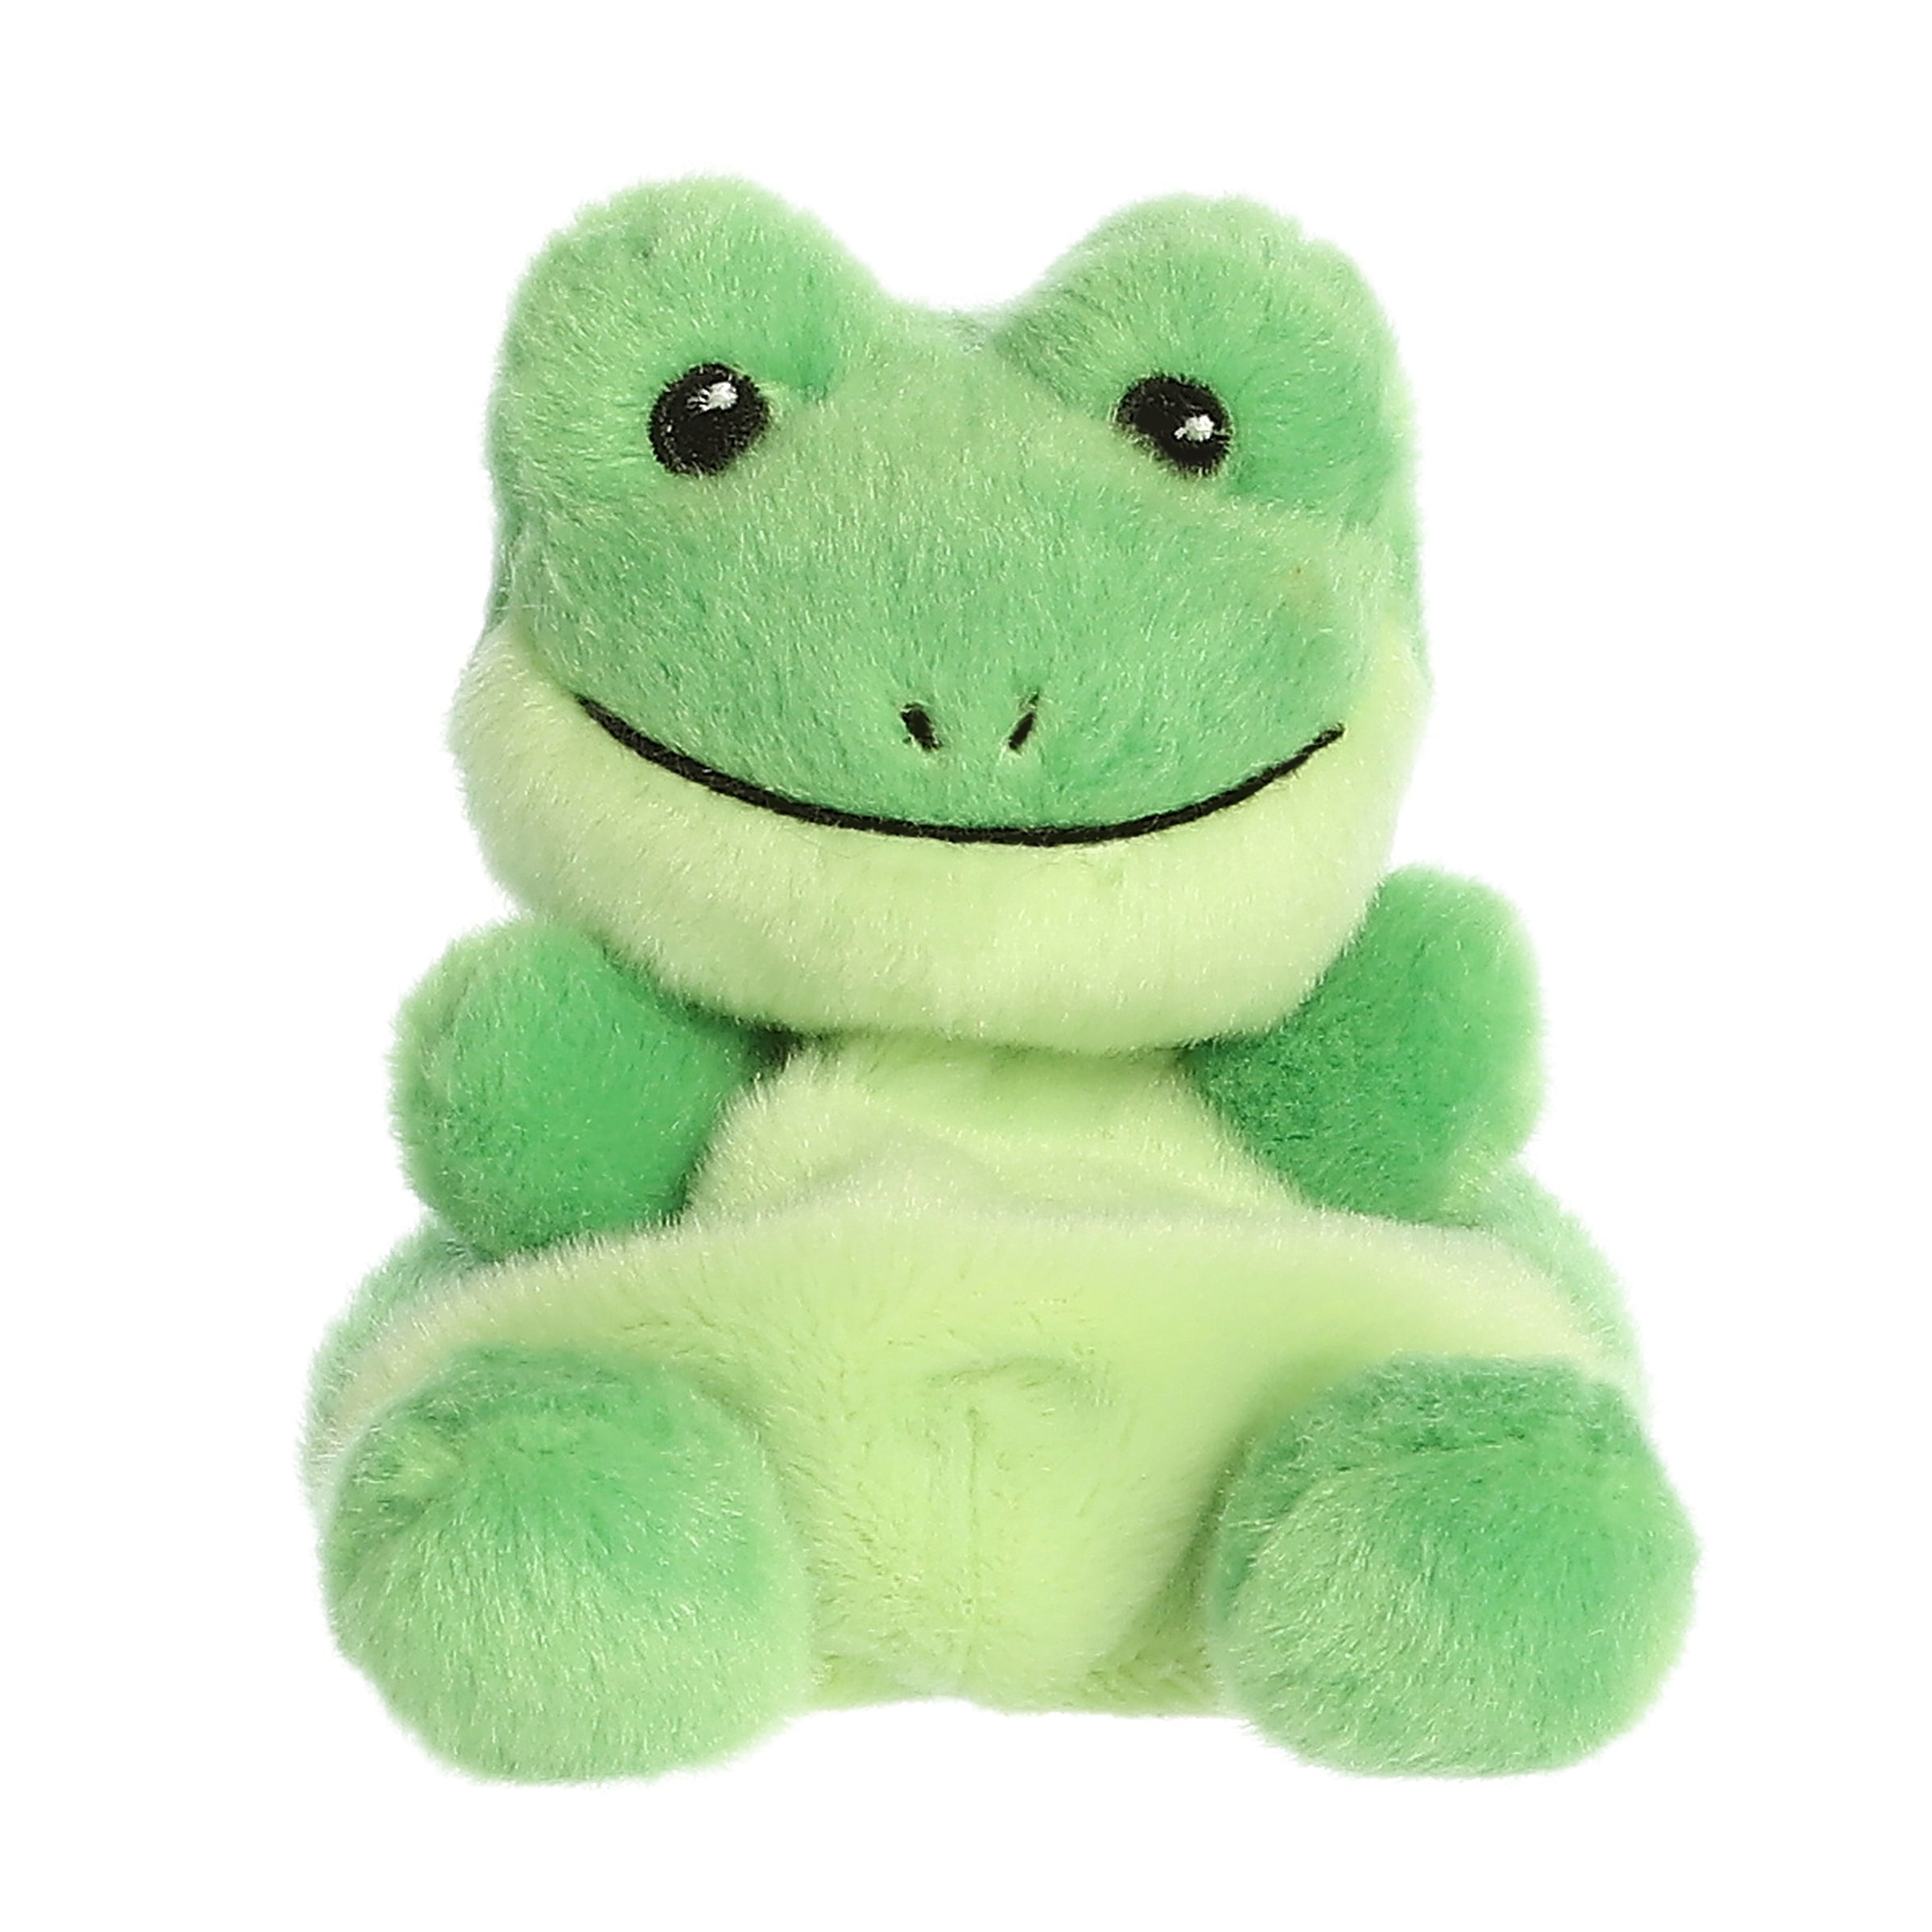 Frog plush from Palm Pals, sporting a radiant green hue, smiling widely and invitingly for endless play and snuggles.